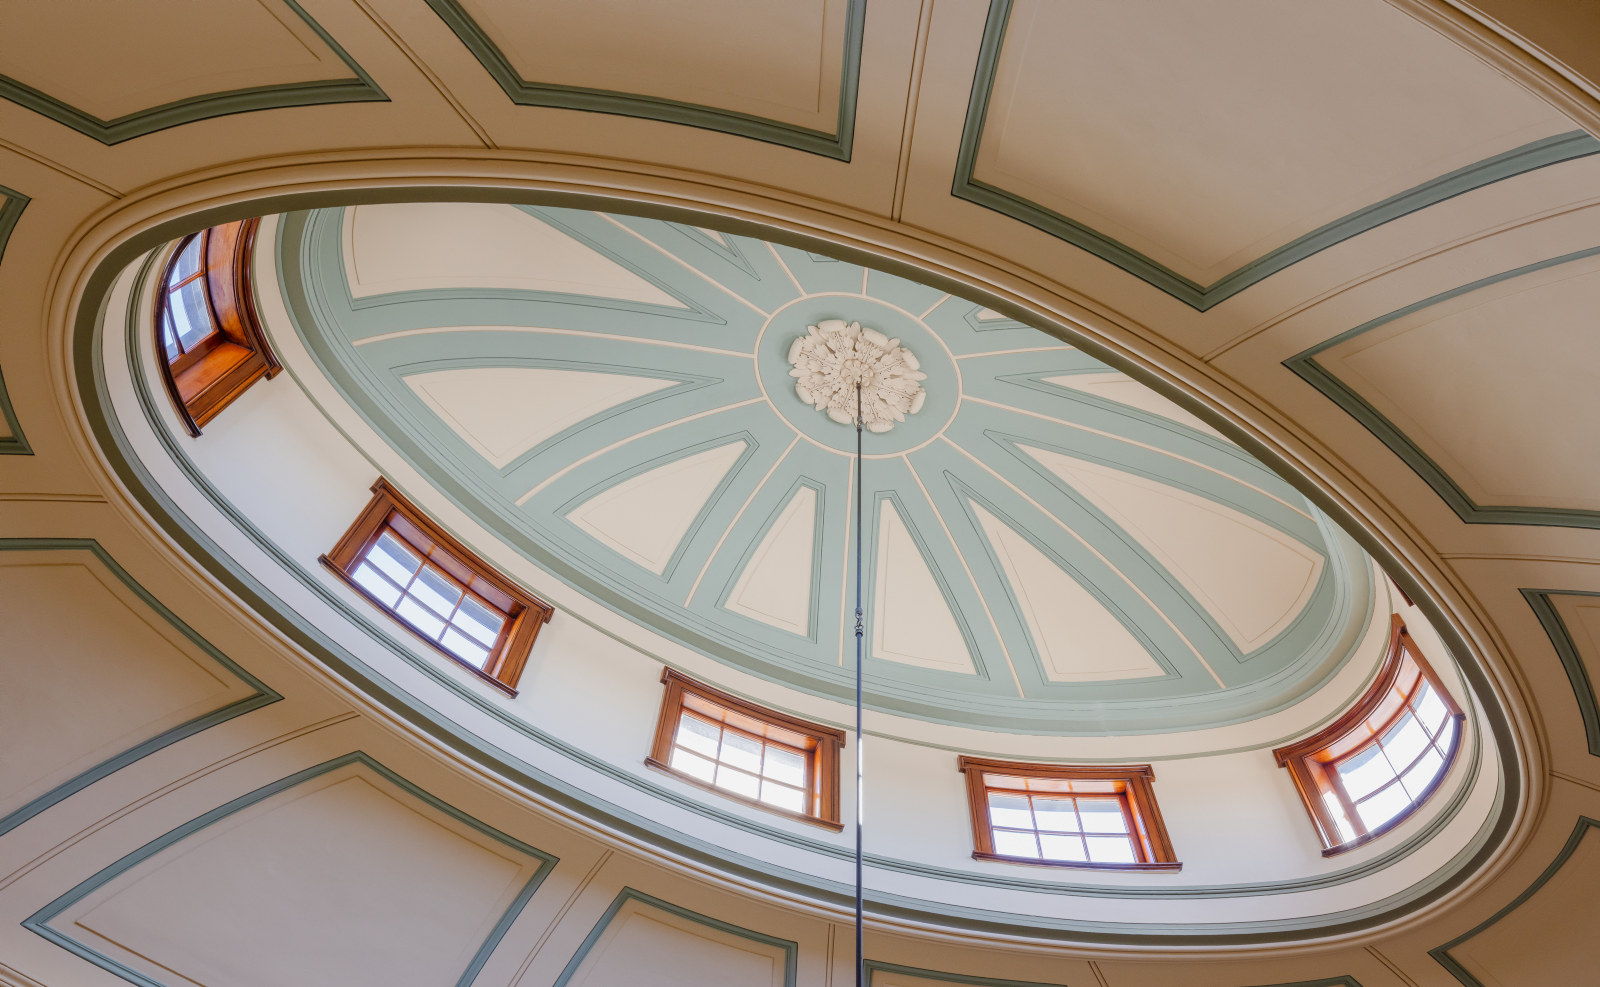 Dome in the saloon, Elizabeth Bay House